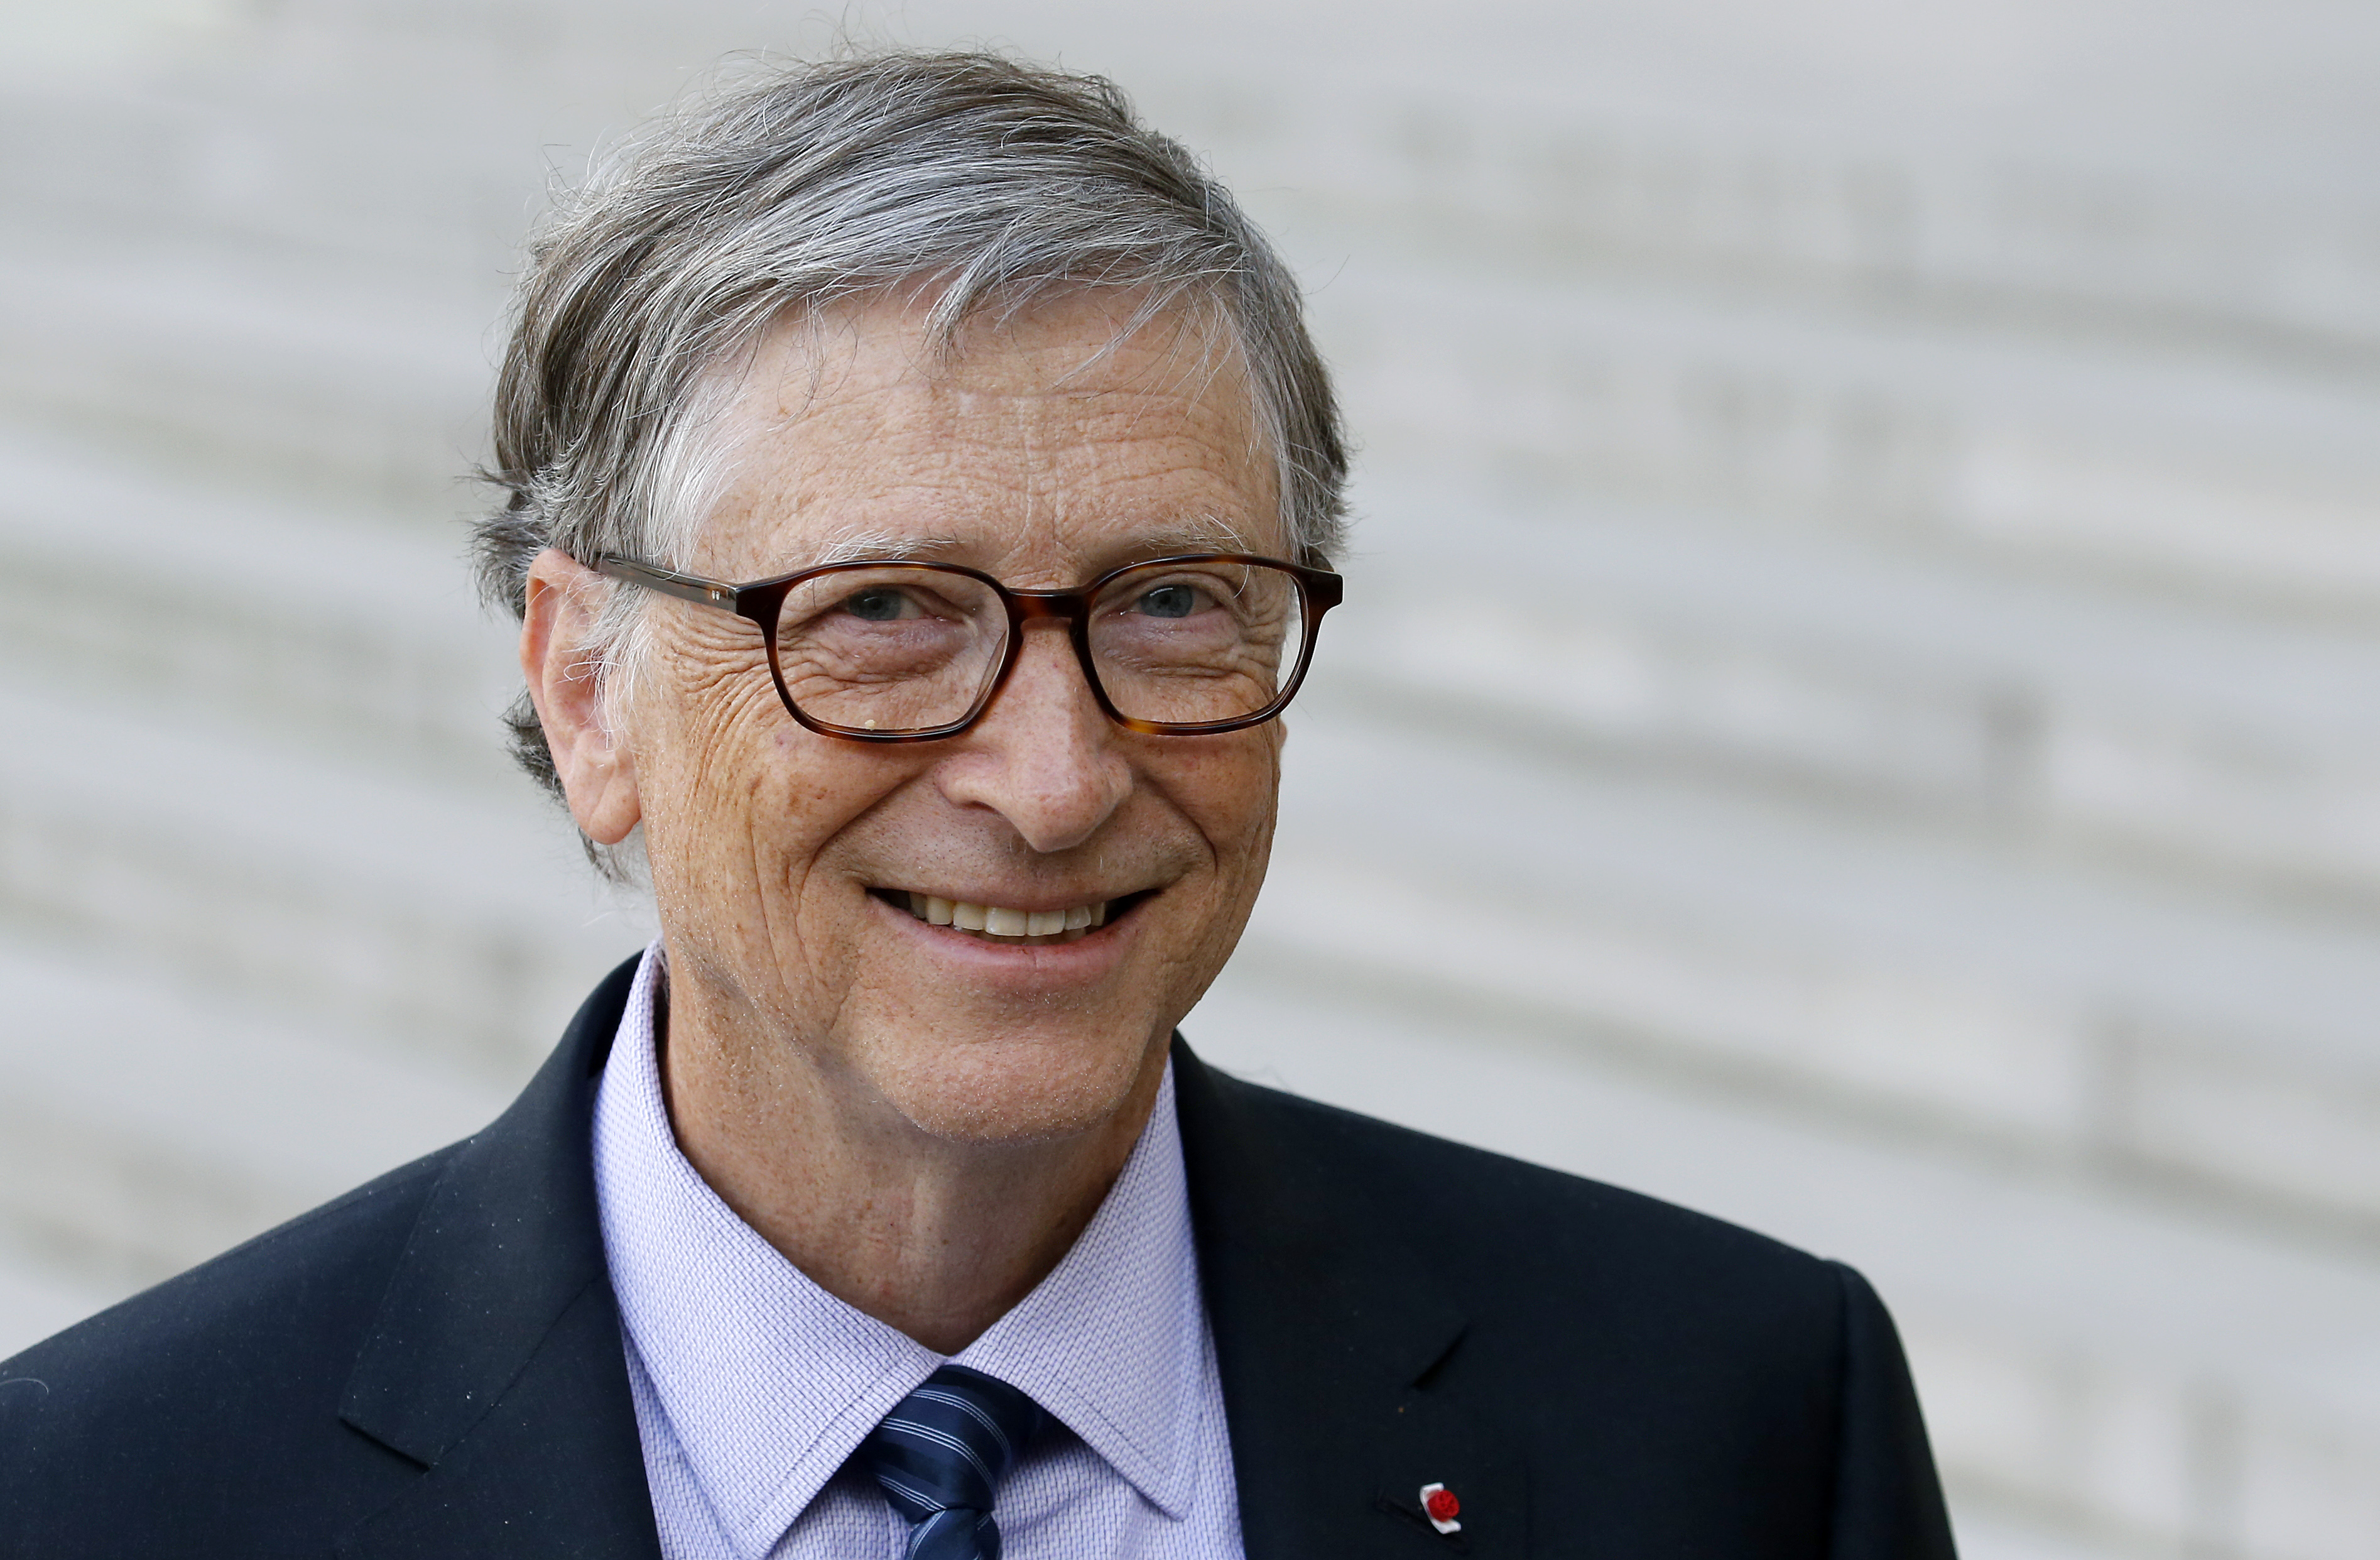 Co-chairman and co-founder of the The Bill and Melinda Gates Foundation, Bill Gates  speaks to the media after his meeting with French president Emmanuel Macron at the Elysee Palace on April 16, 2018 in Paris, France. (Chesnot&mdash;Getty Images)